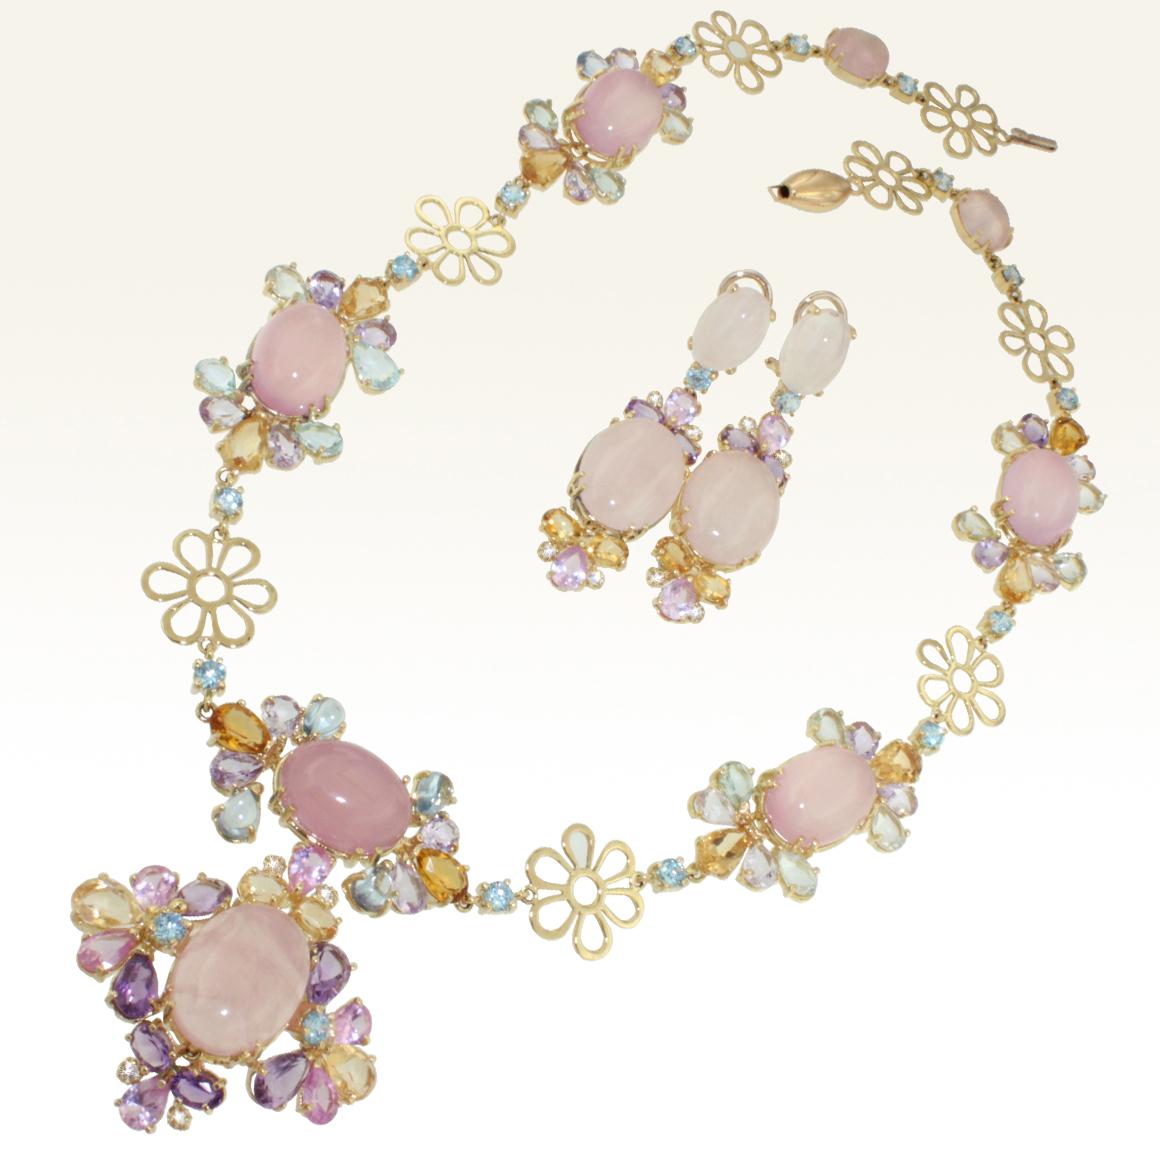 Inspired by a bouquet of flowers , creates an elegant Necklace . Unique design by Stanoppi Jewellery since1948 in Italy .
Modern Necklace in 18k yellow gold with Pink Quartz (oval cabochon cut, size: 13x18mm), Amethyst (oval cut, size: 4x6 mm, drop